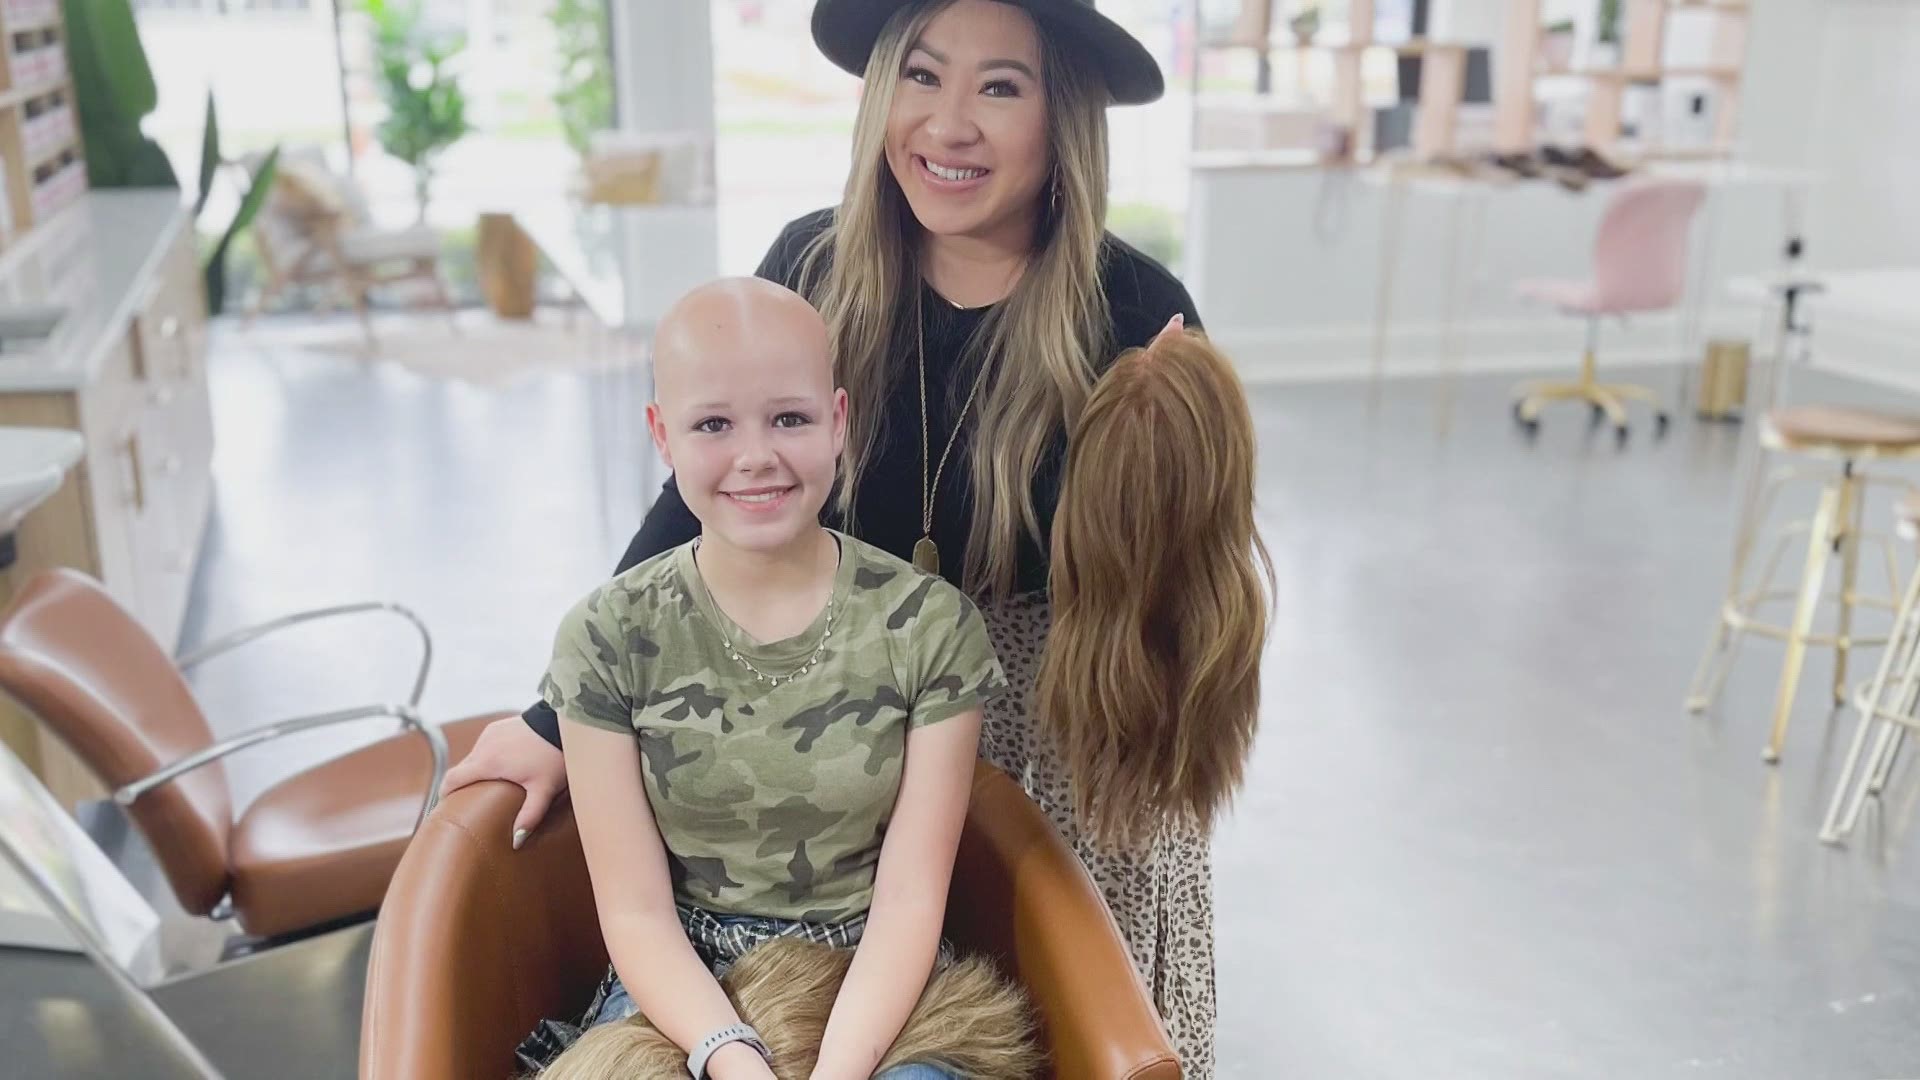 A local hairstylist has decided to help children suffering from hair loss by providing free wigs.